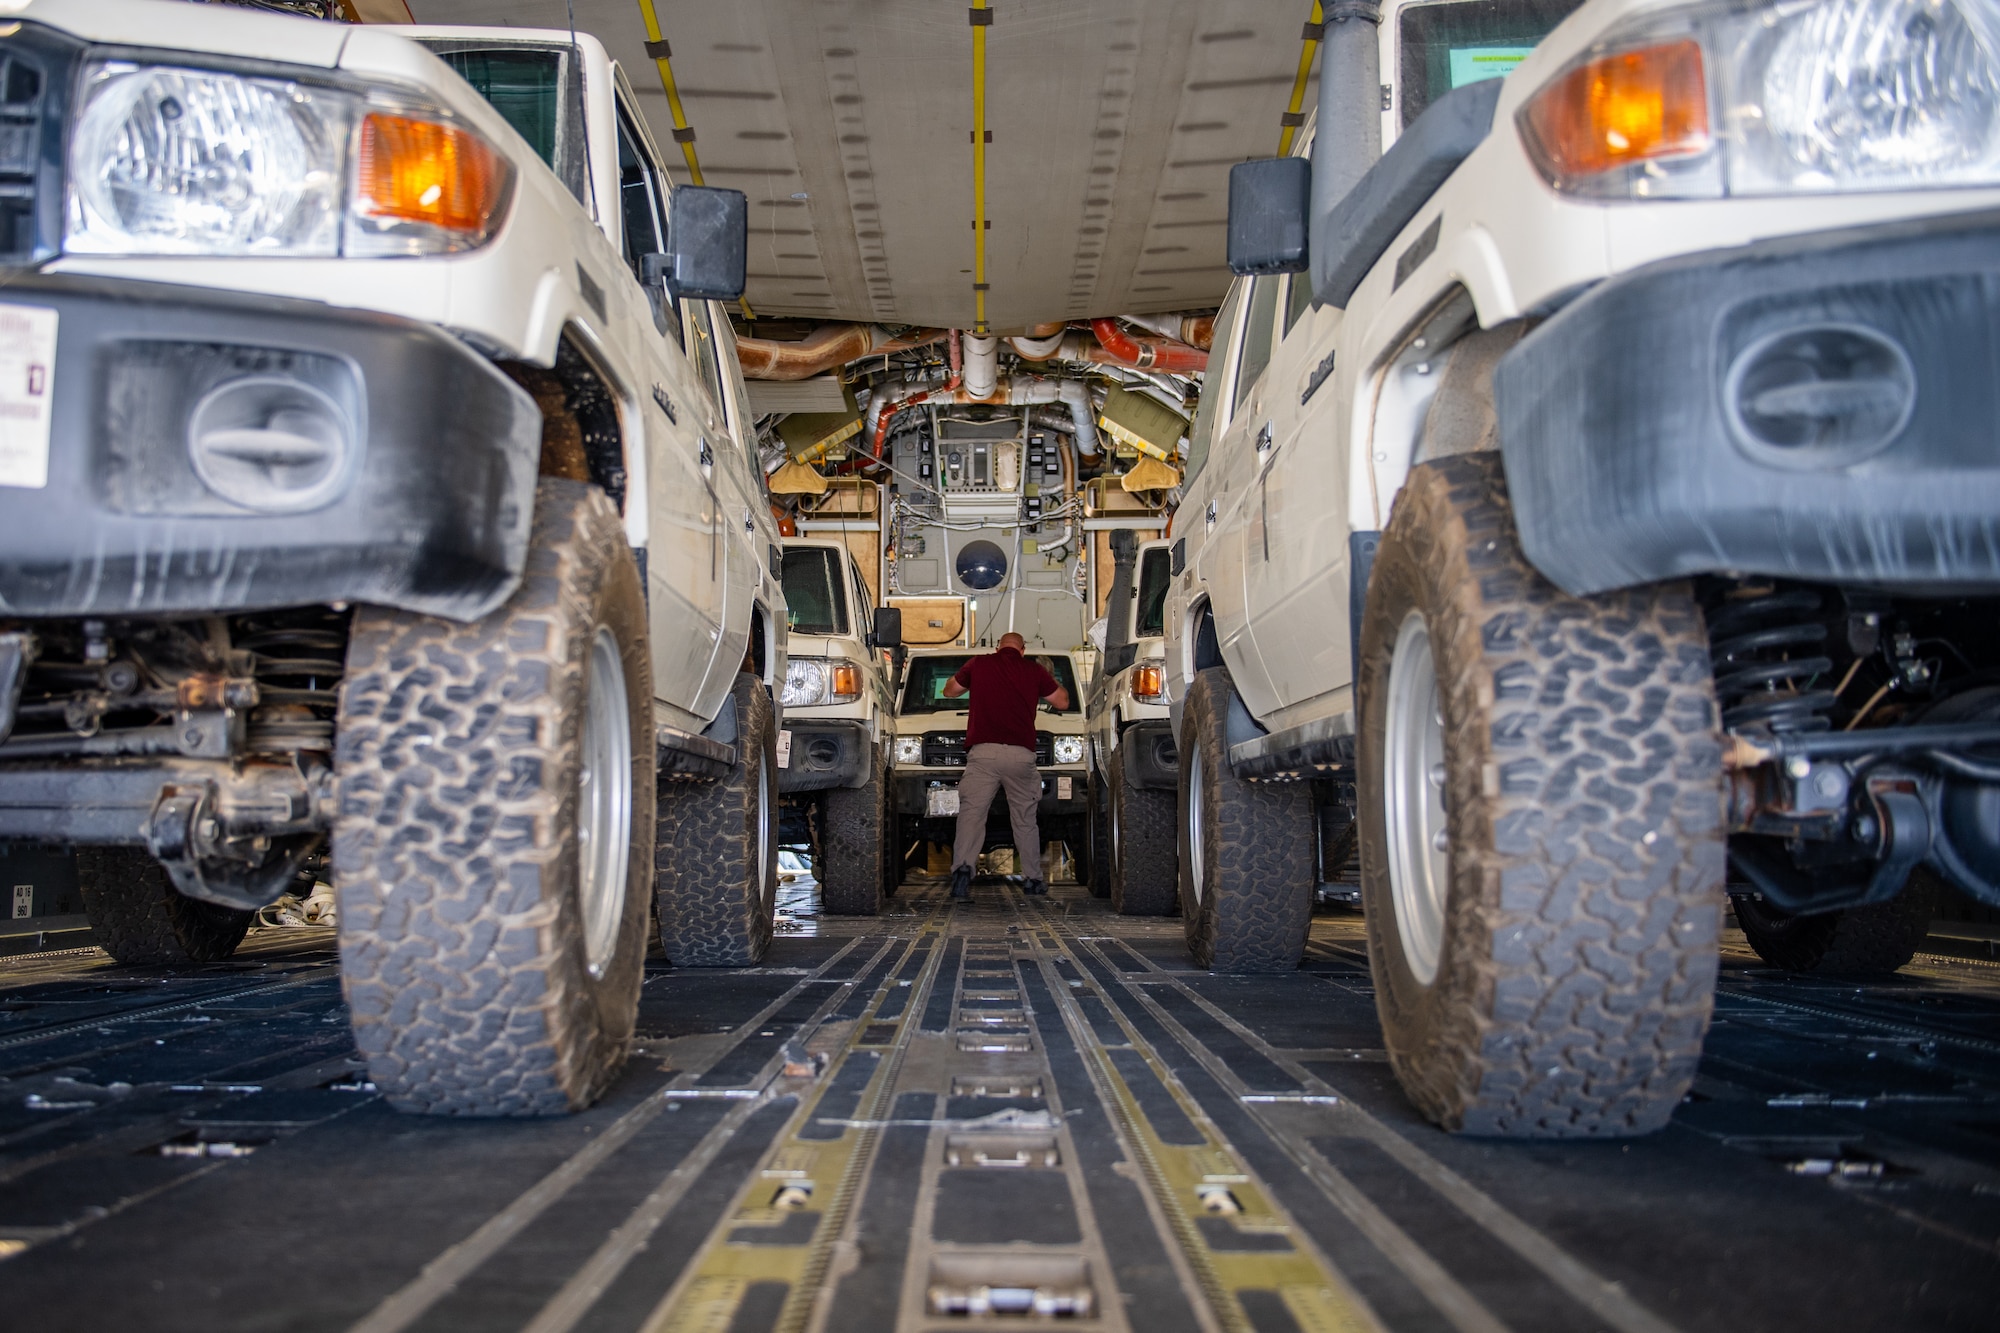 Tech. Sgt. Kyle Hersel, Assistant NCO-in-charge of Air Terminal Operations, Jordan Port, 387th Air Expeditionary Squadron, confirms the cargo manifest for a delivery of vehicles in Jordan, Oct. 14, 2019. The port provides aerial logistics for the American Embassy to Jordan through the Military Assistance Program, handling cargo and passenger movement in support of State Department efforts.